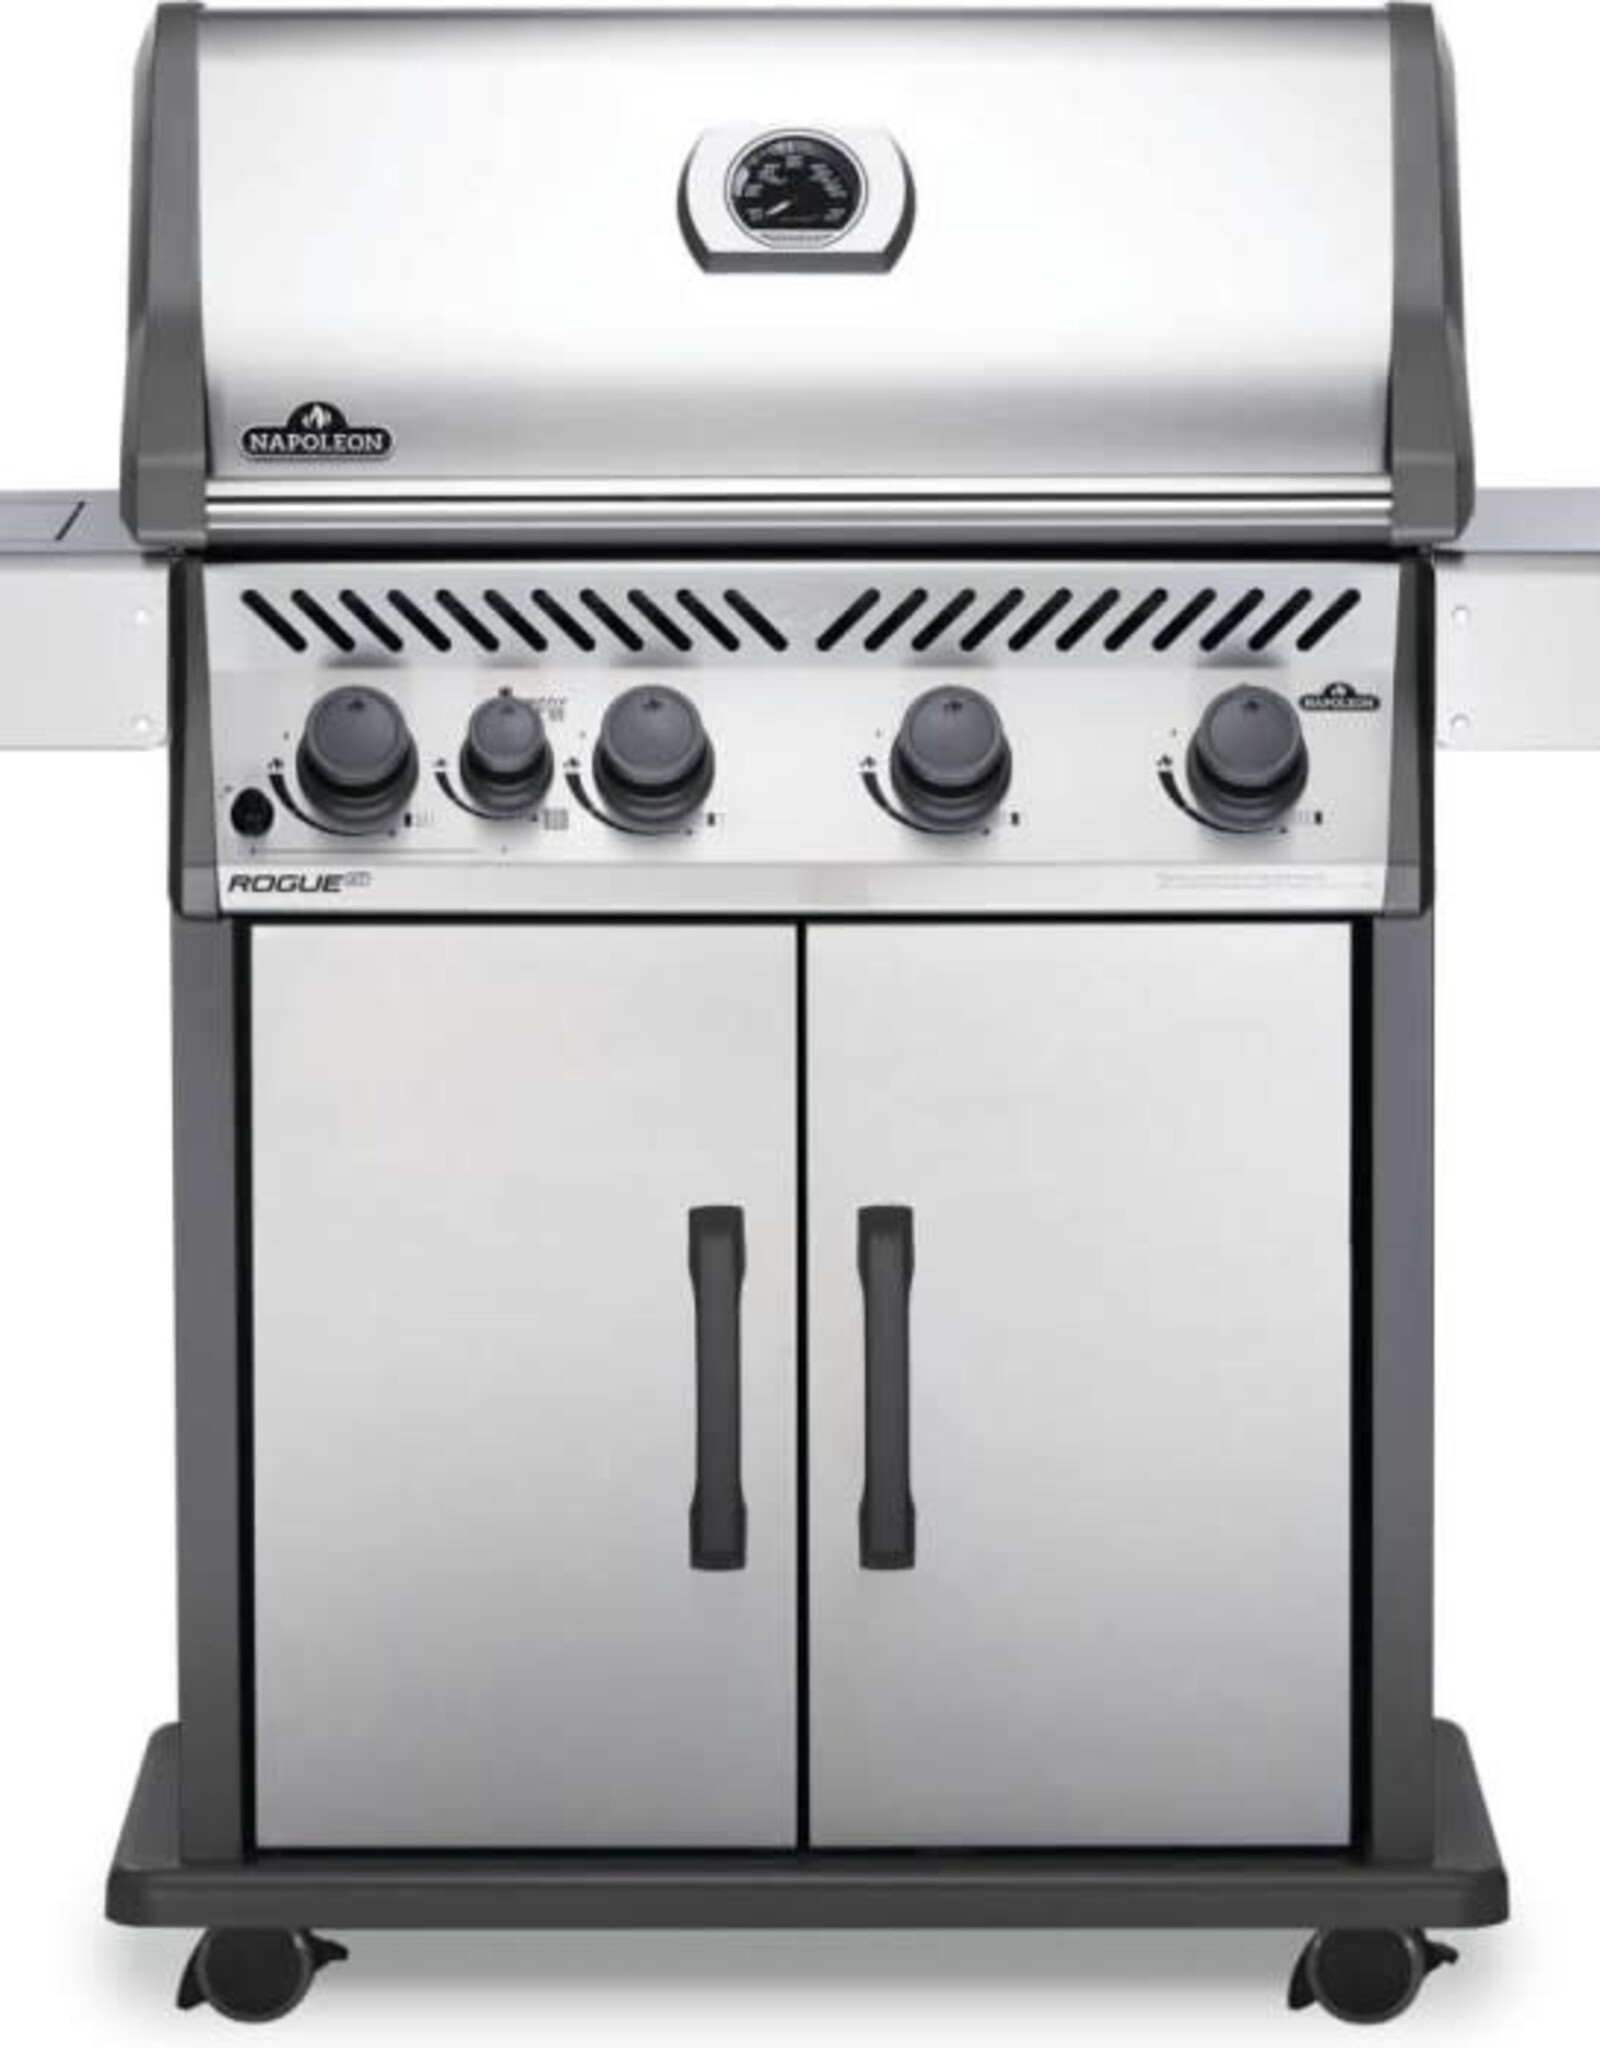 Napoleon Napoleon Rogue XT 525 SIB Propane Gas Grill with Infrared Side Burner - Stainless Steel - RXT525SIBPSS-1